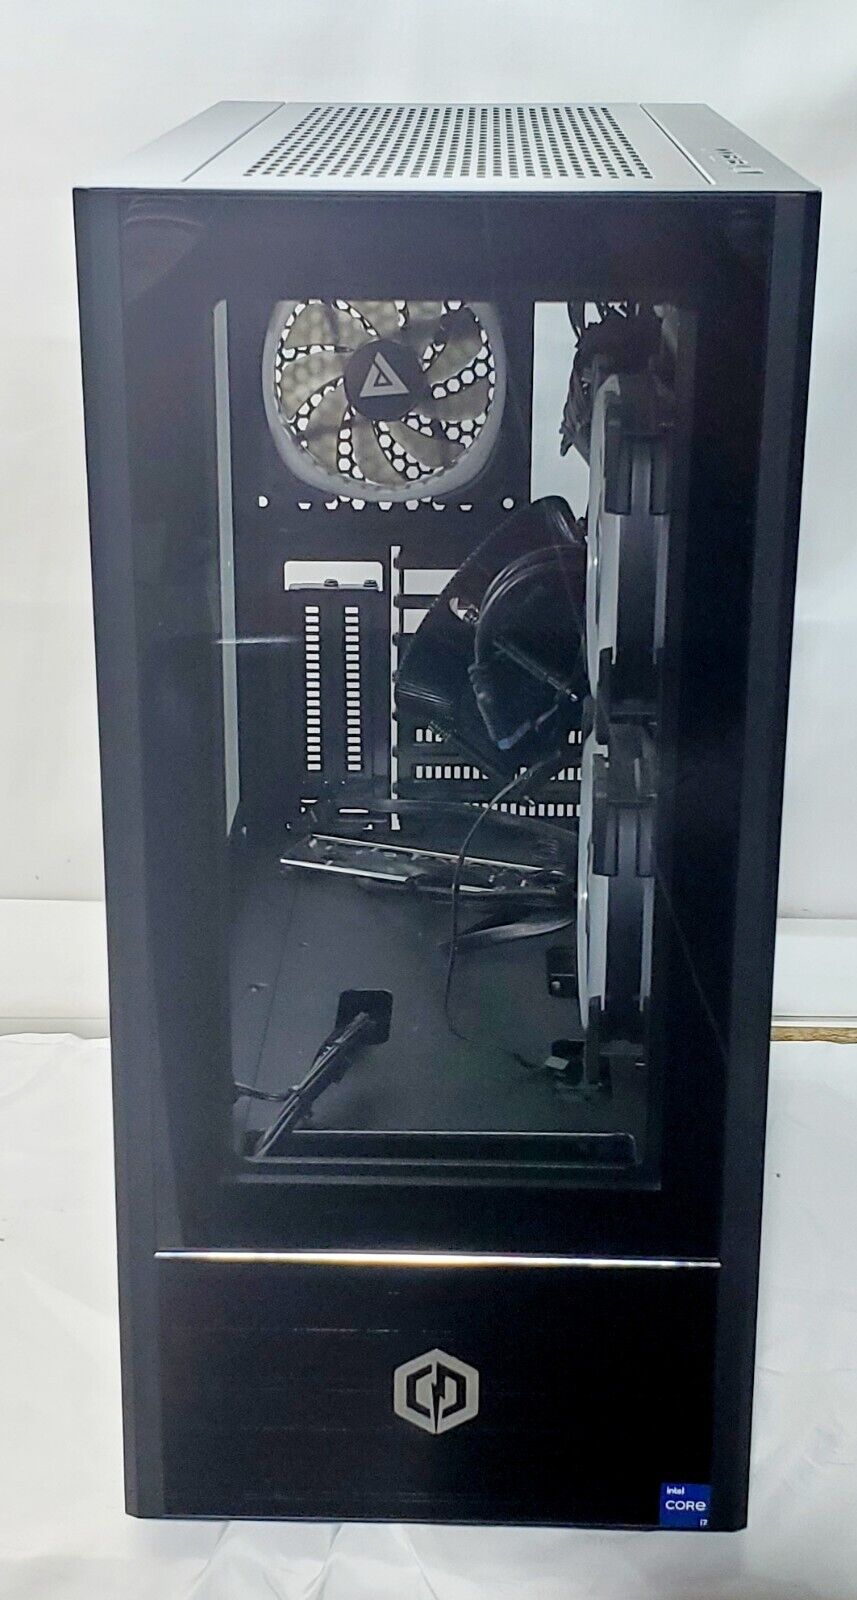 CyberPowerPC Gamer Supreme  case with 500W PSU, RGB Case and 1200 SOCKET FAN.